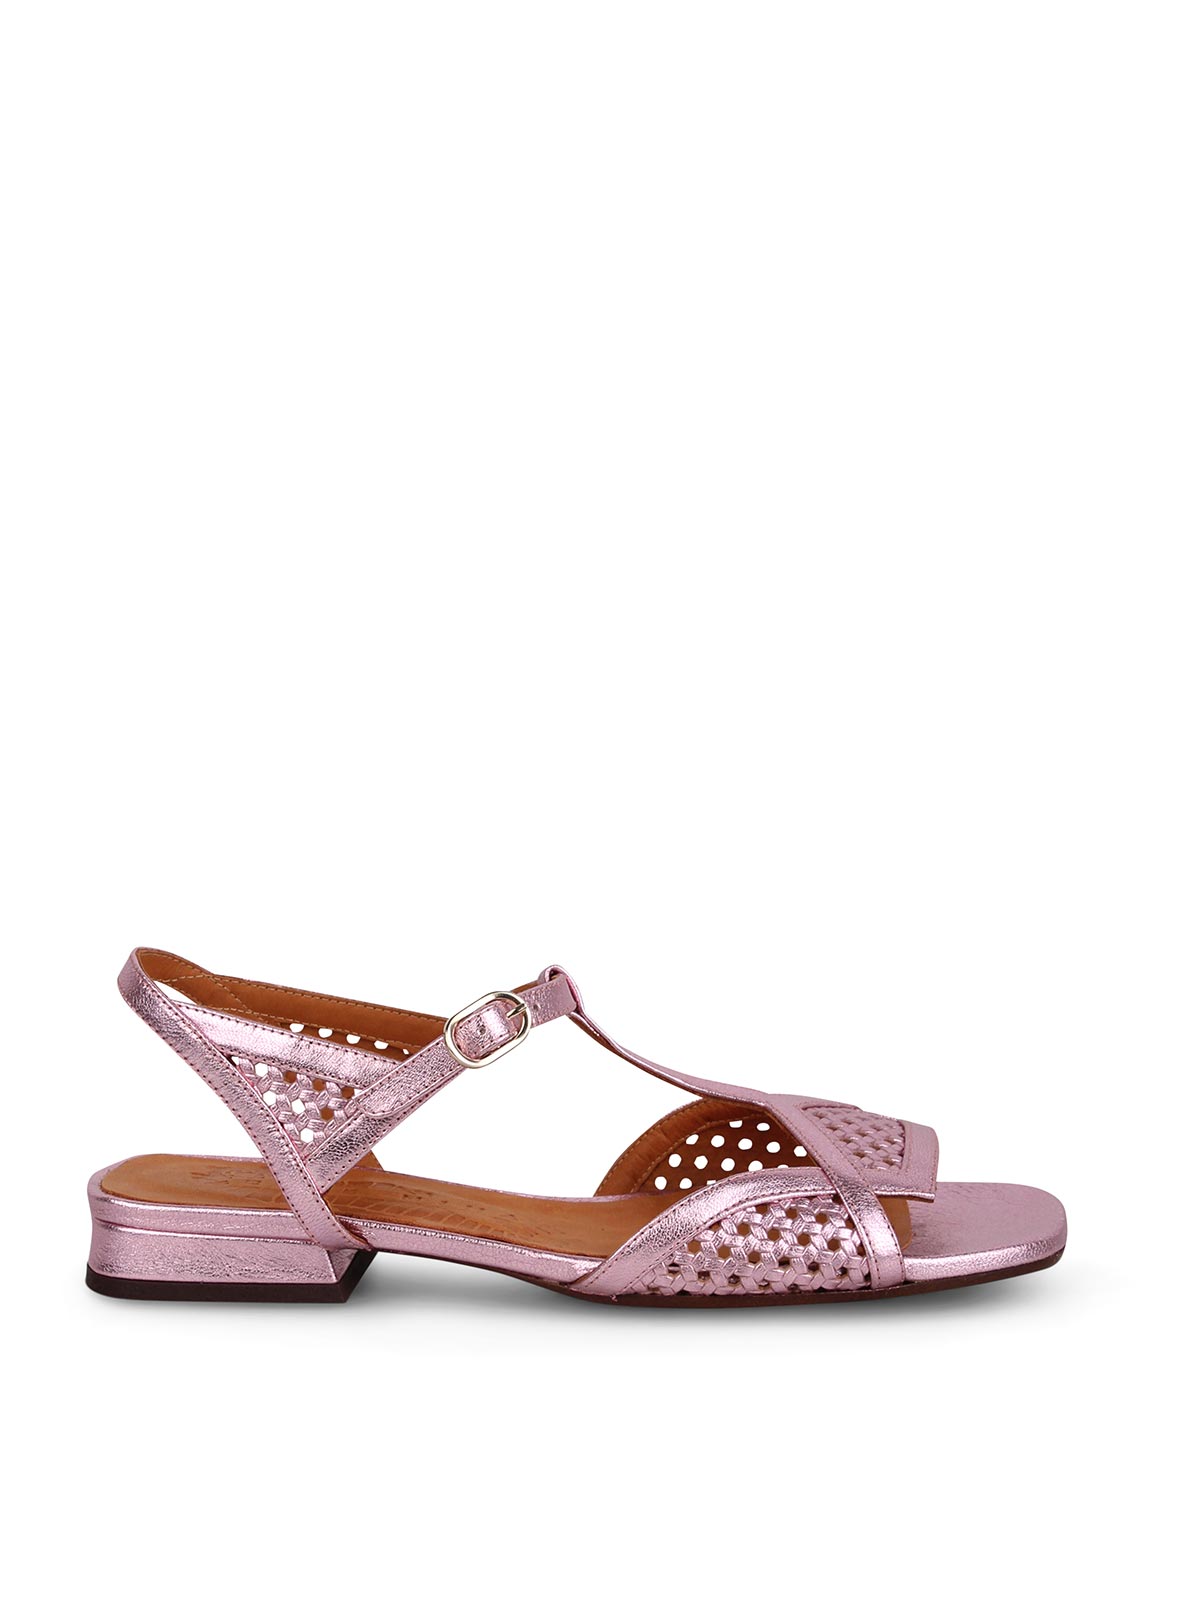 Chie Mihara Tencha Sandals In Pink